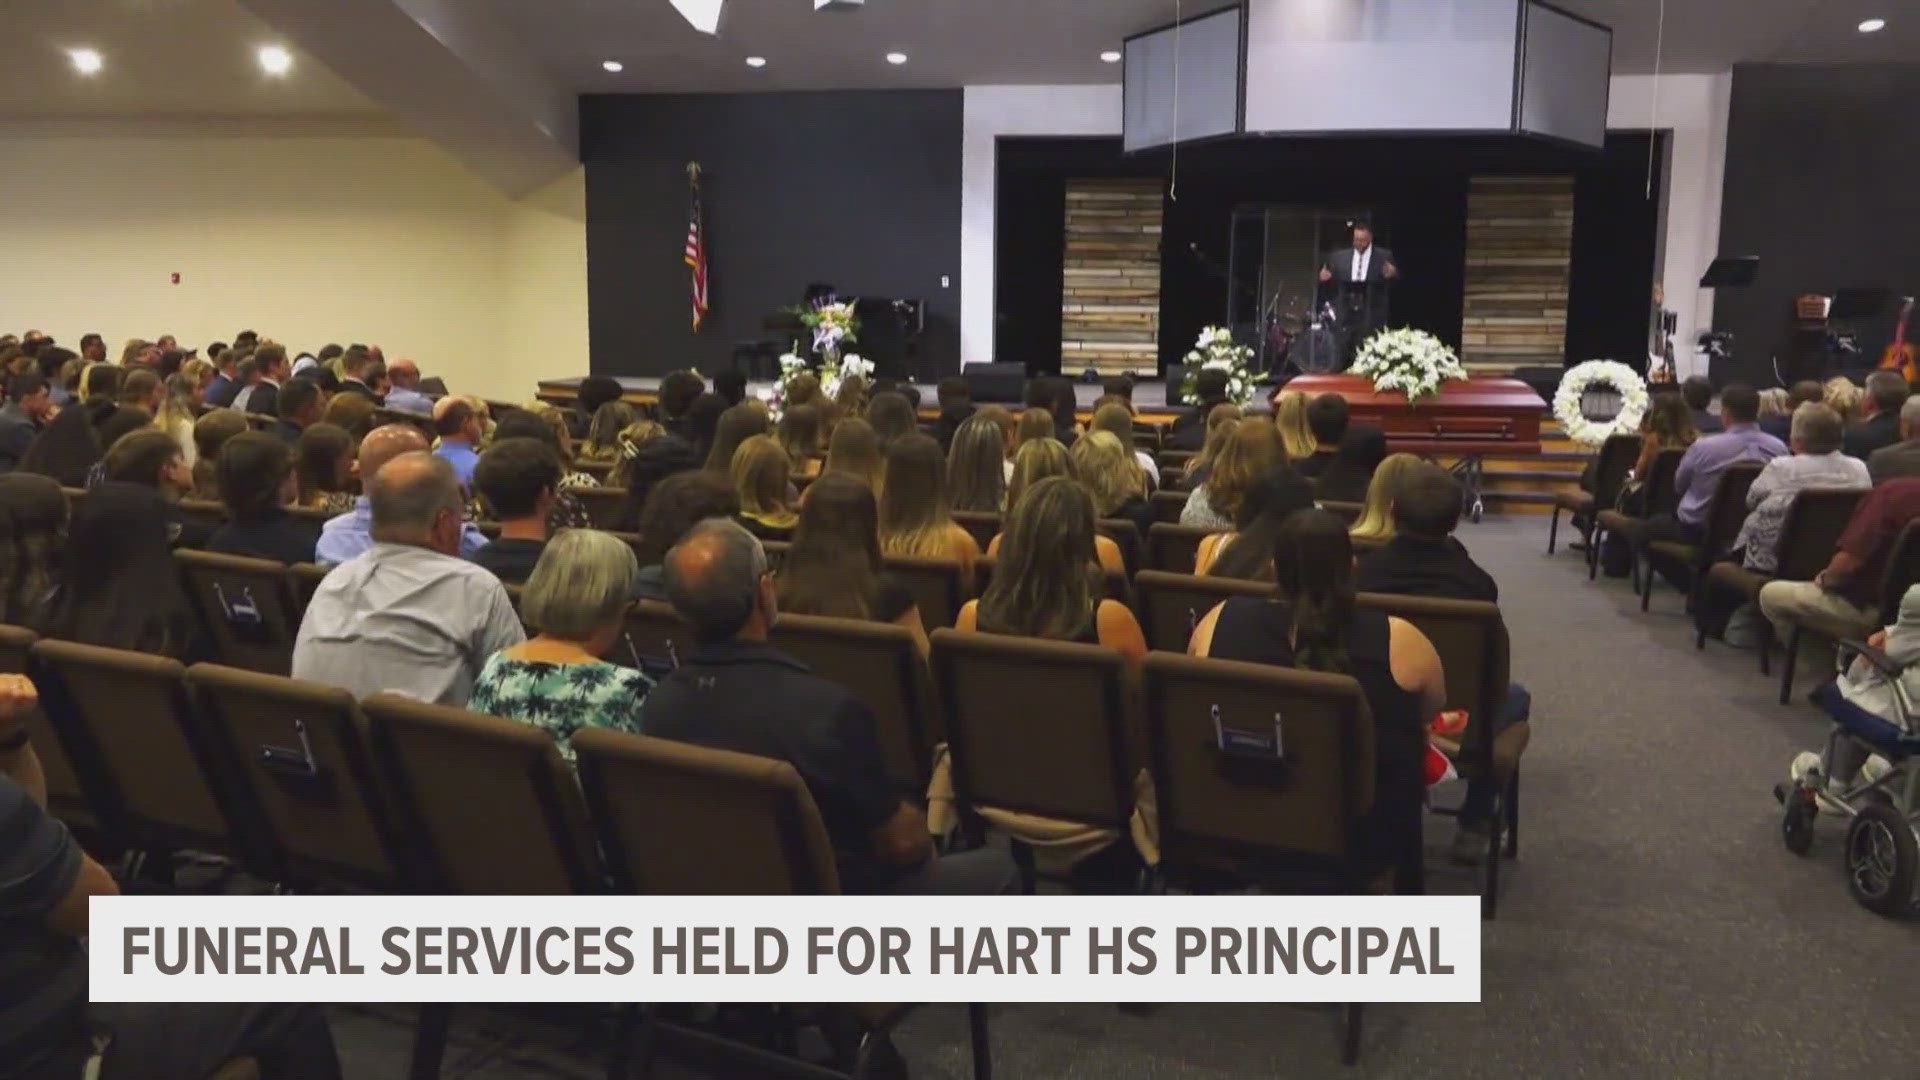 The Hart community has been mourning the loss of the high school's principal.